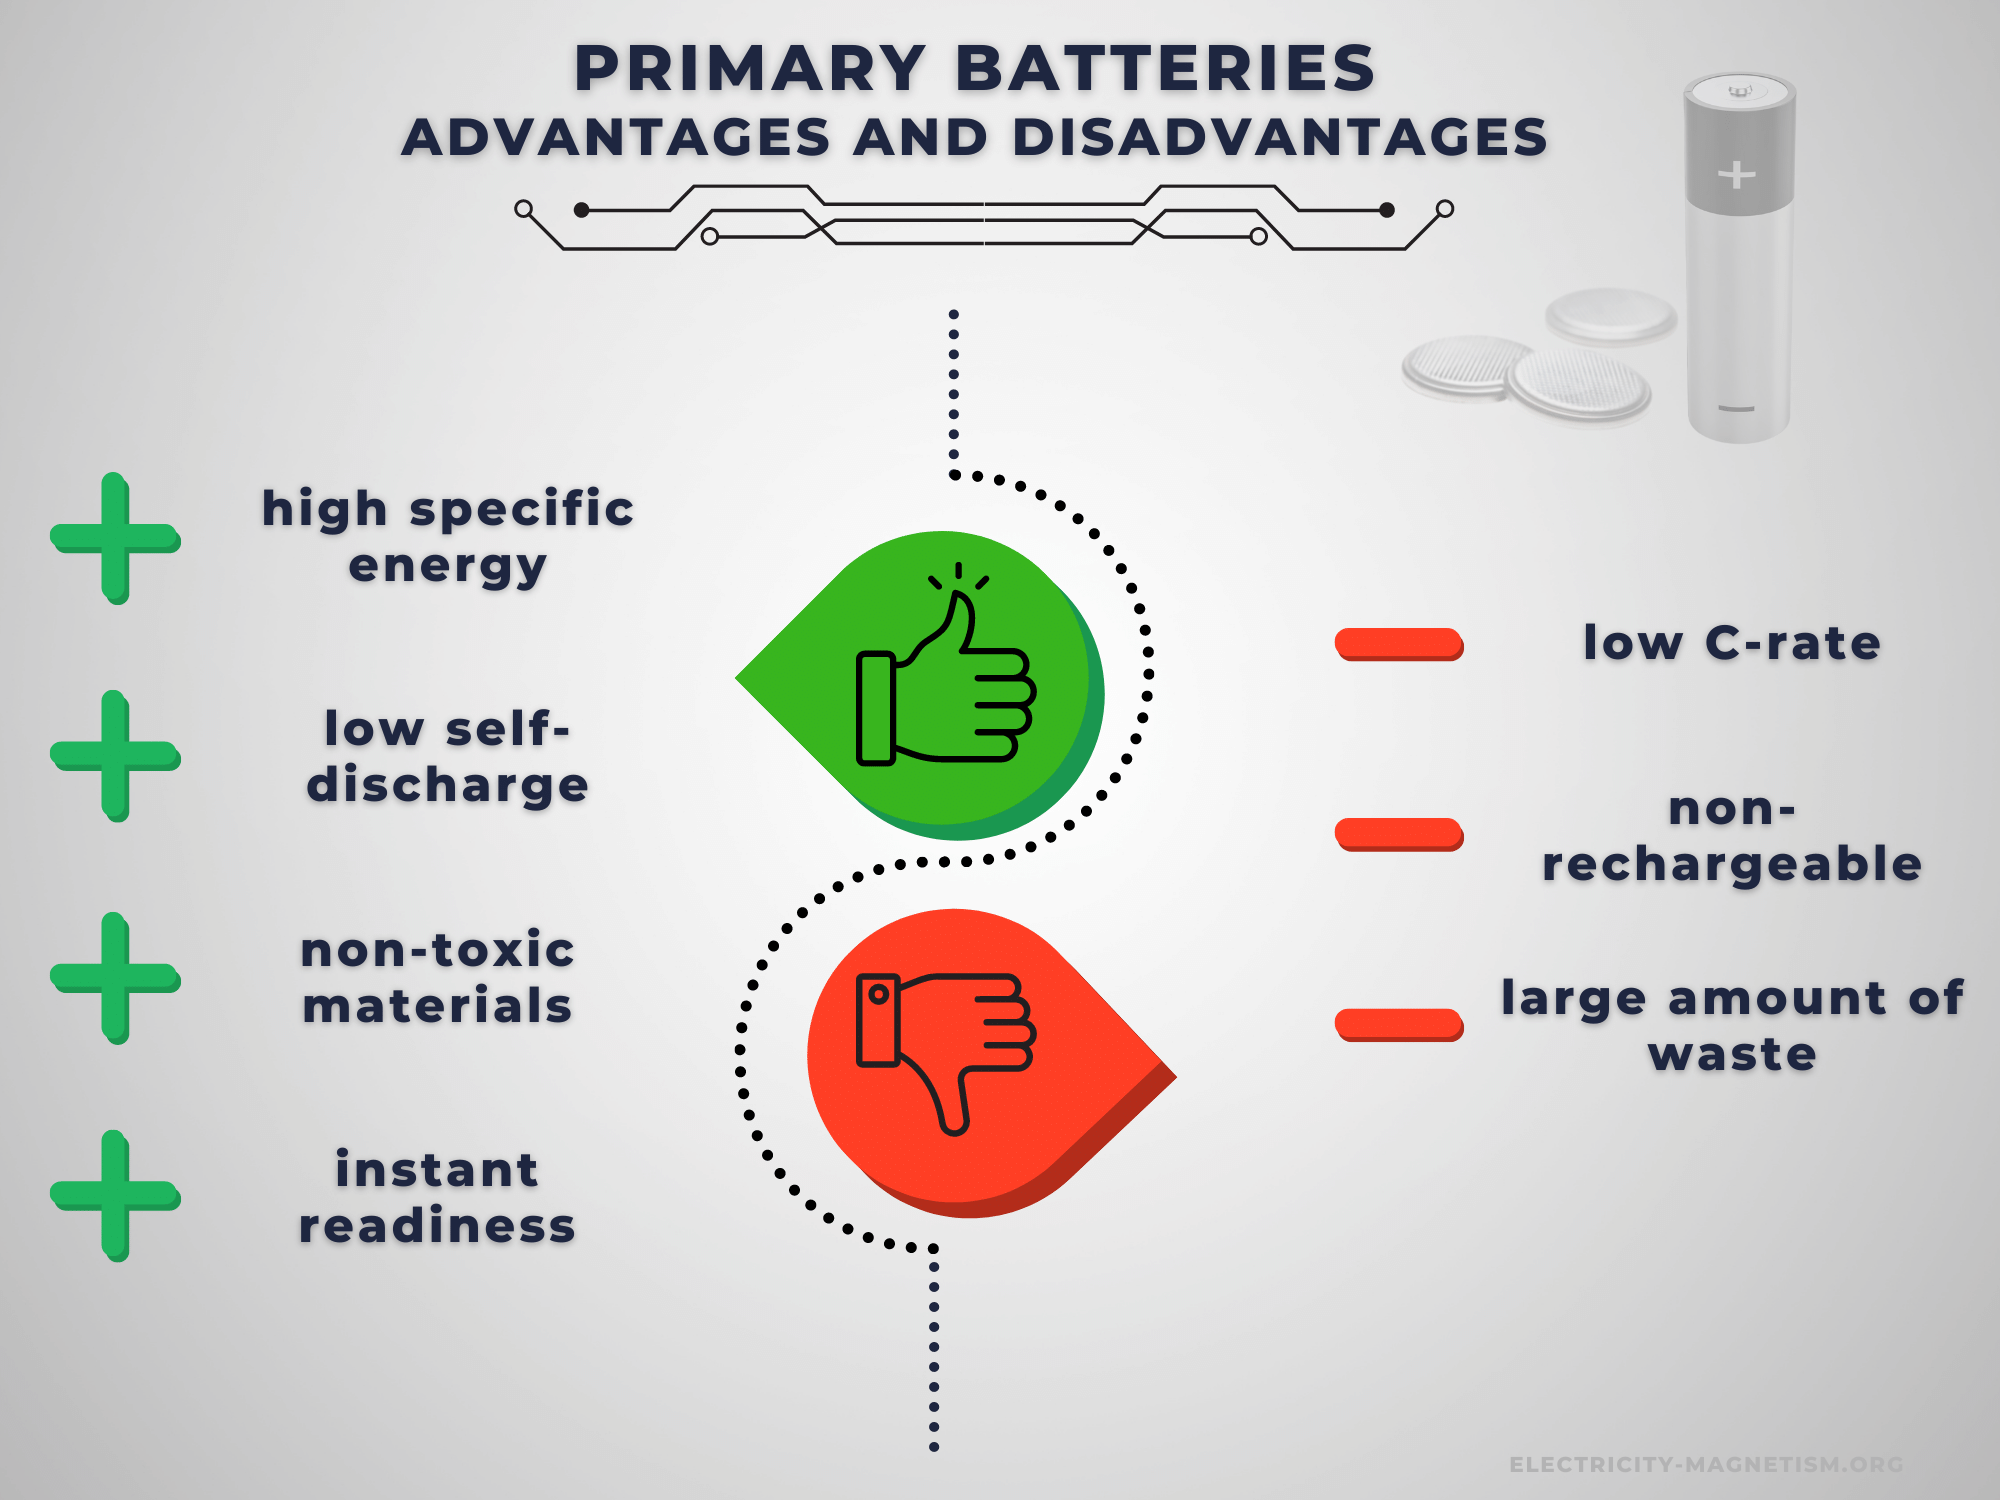 Advantages and Disadvantages of Primary Batteries